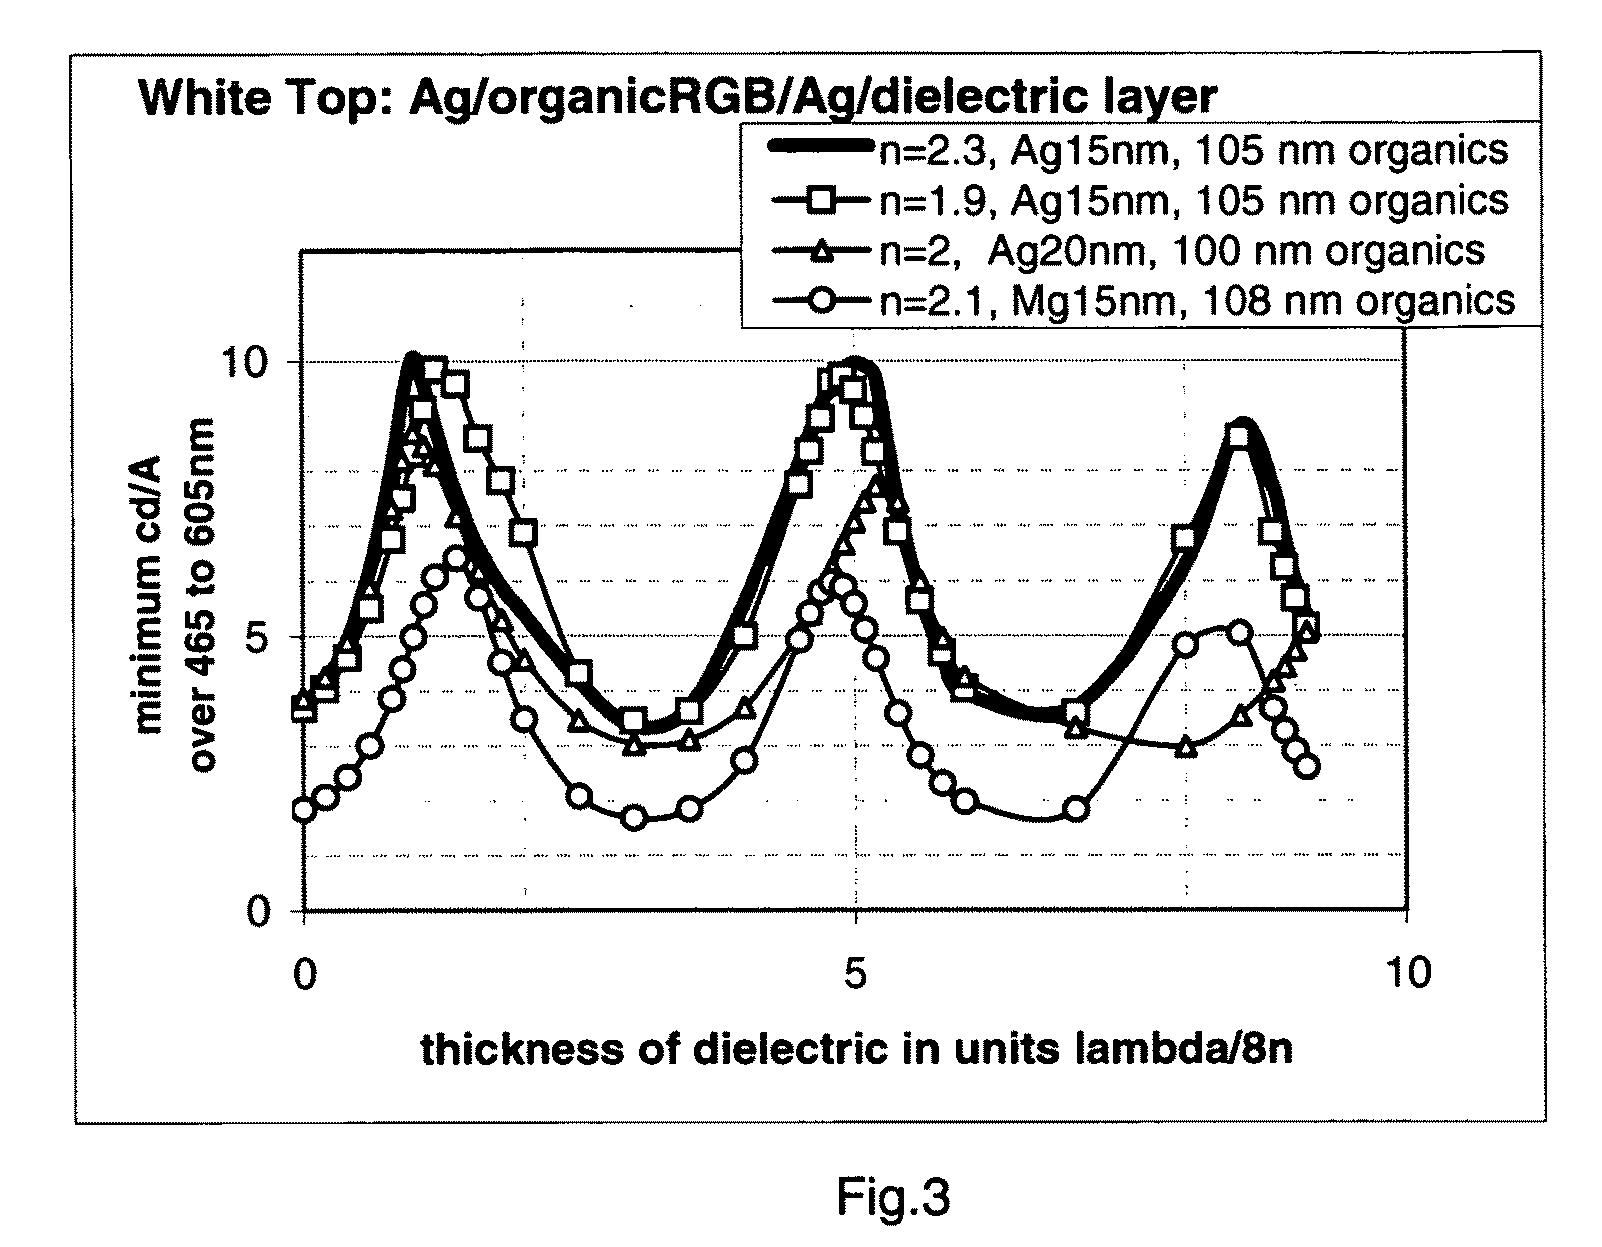 Oled or group of adjacent oleds with a light-extraction layer efficient over a large range of wavelengths